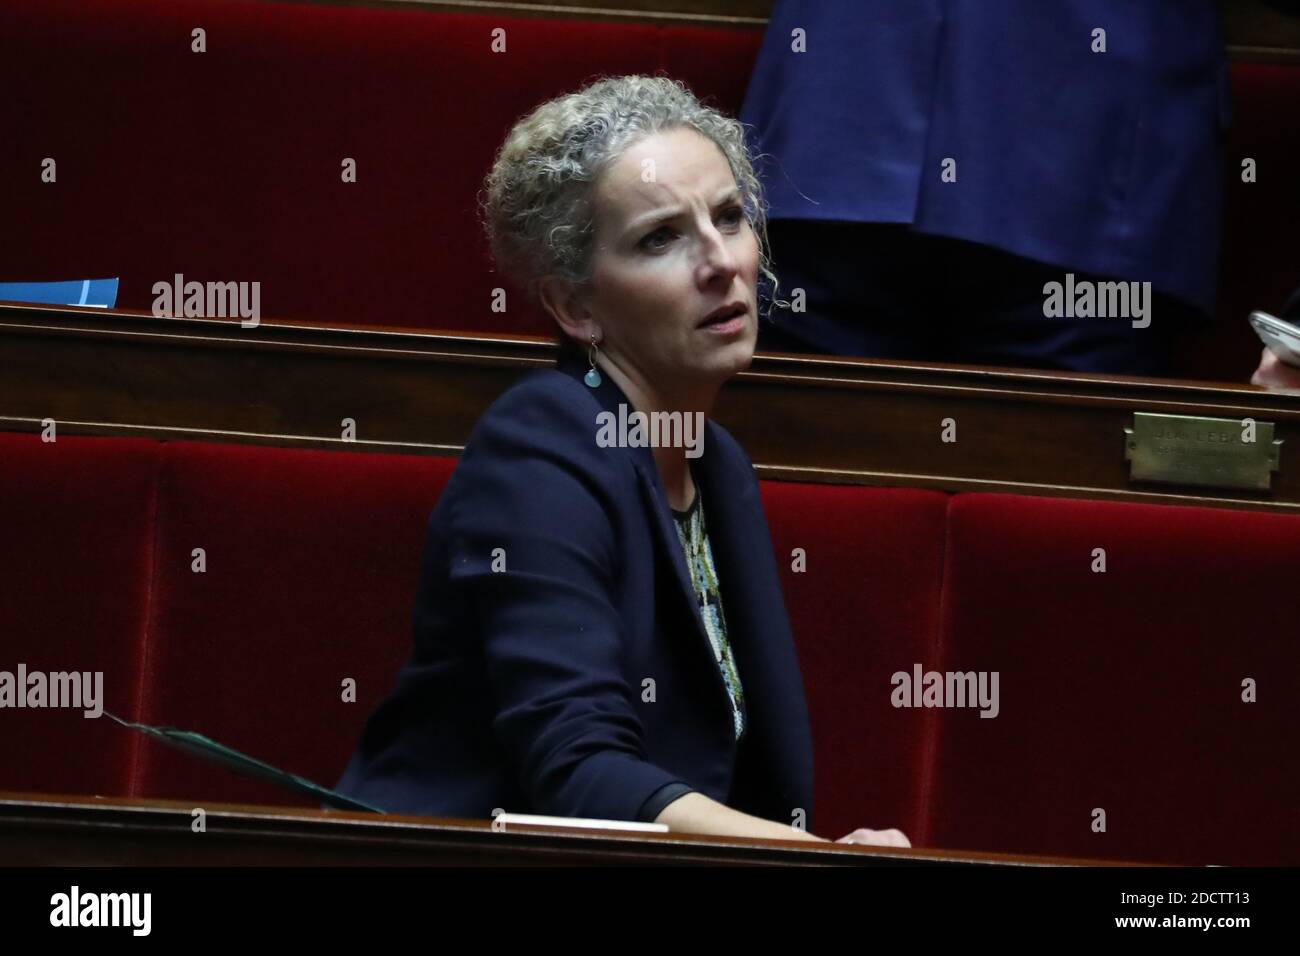 Delphine Bathol during the Questions to the government session in the National Assembly, Paris, France on January 31st, 2018 Photo by Henri Szwarc/ABACAPRESS.COM Stock Photo